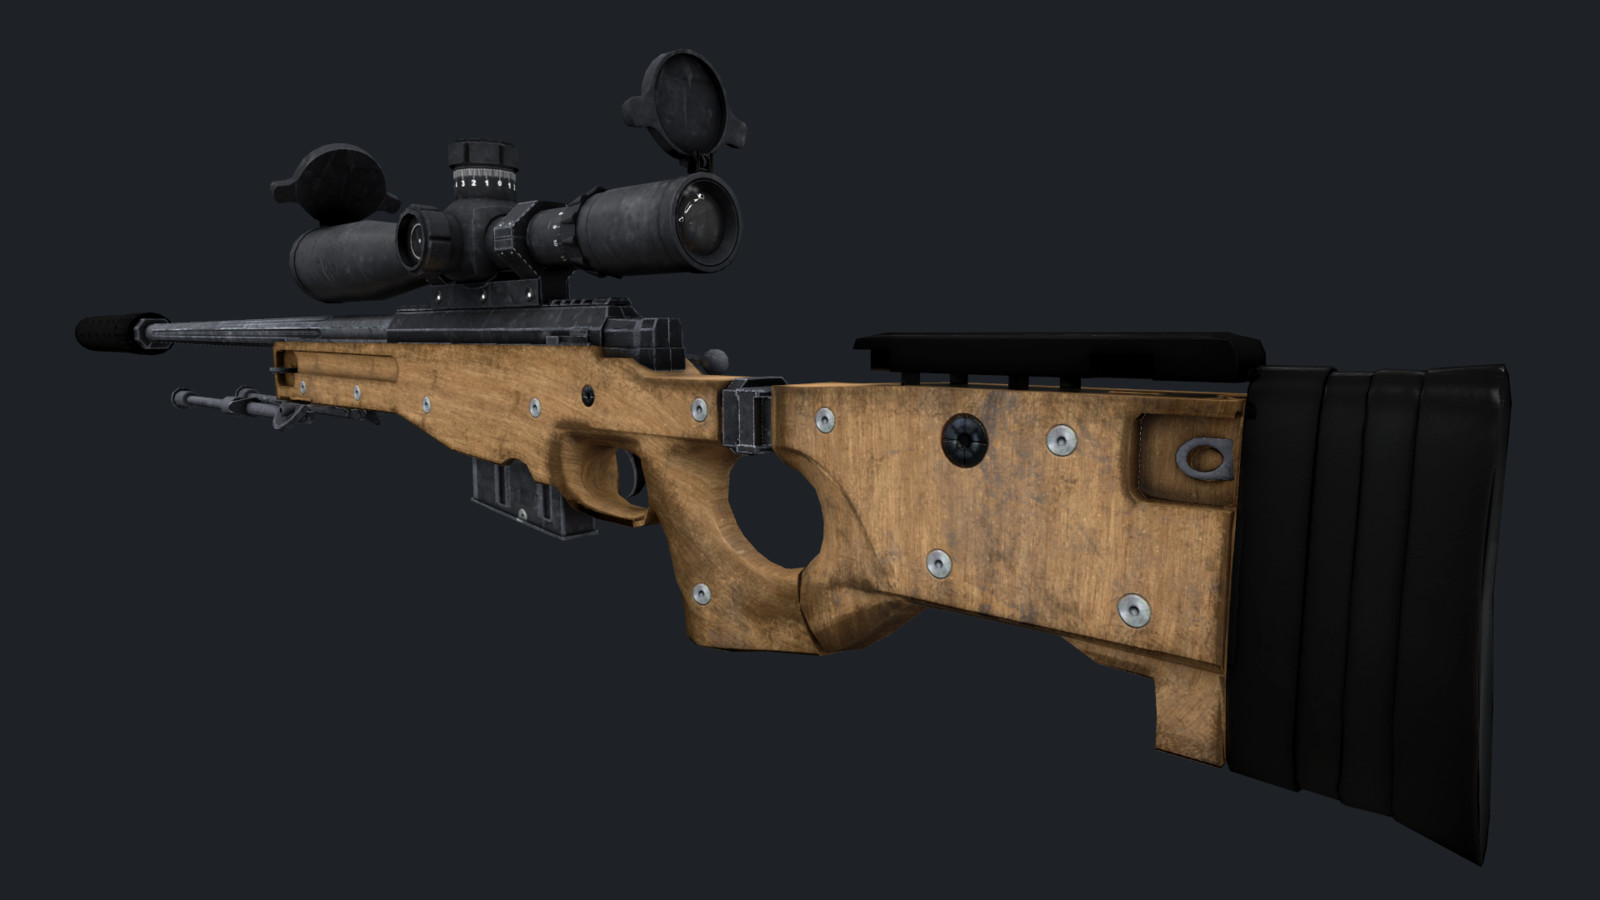 Awp cannons kg v4 мастерская фото 112